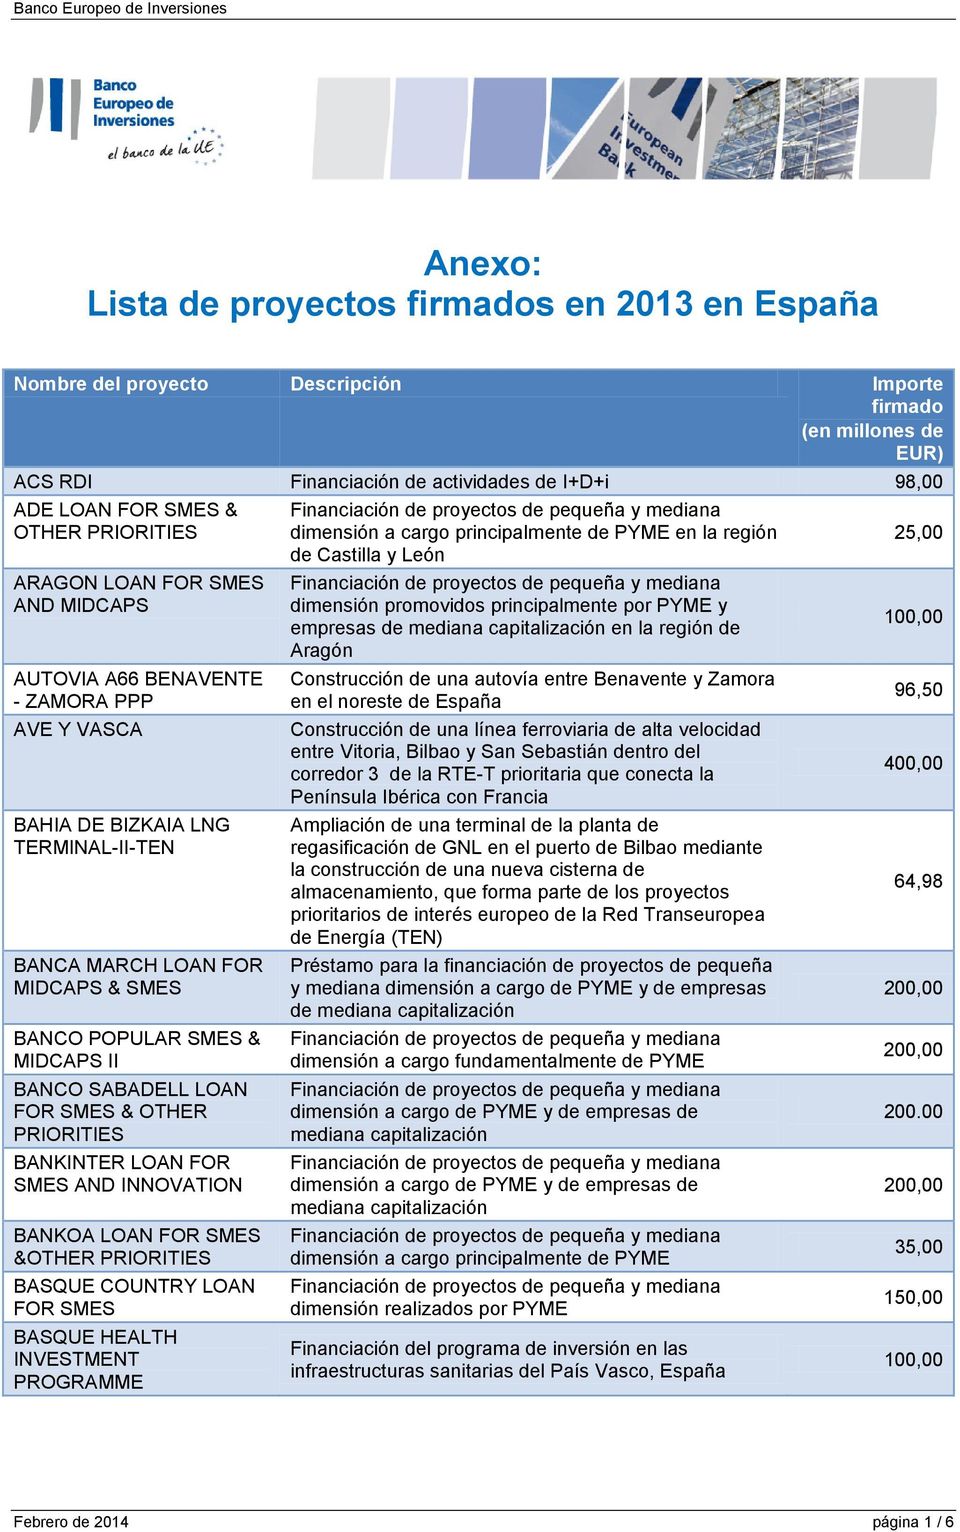 BANCO SABADELL LOAN FOR SMES & OTHER PRIORITIES BANKINTER LOAN FOR SMES AND INNOVATION BANKOA LOAN FOR SMES &OTHER PRIORITIES BASQUE COUNTRY LOAN FOR SMES BASQUE HEALTH INVESTMENT PROGRAMME dimensión